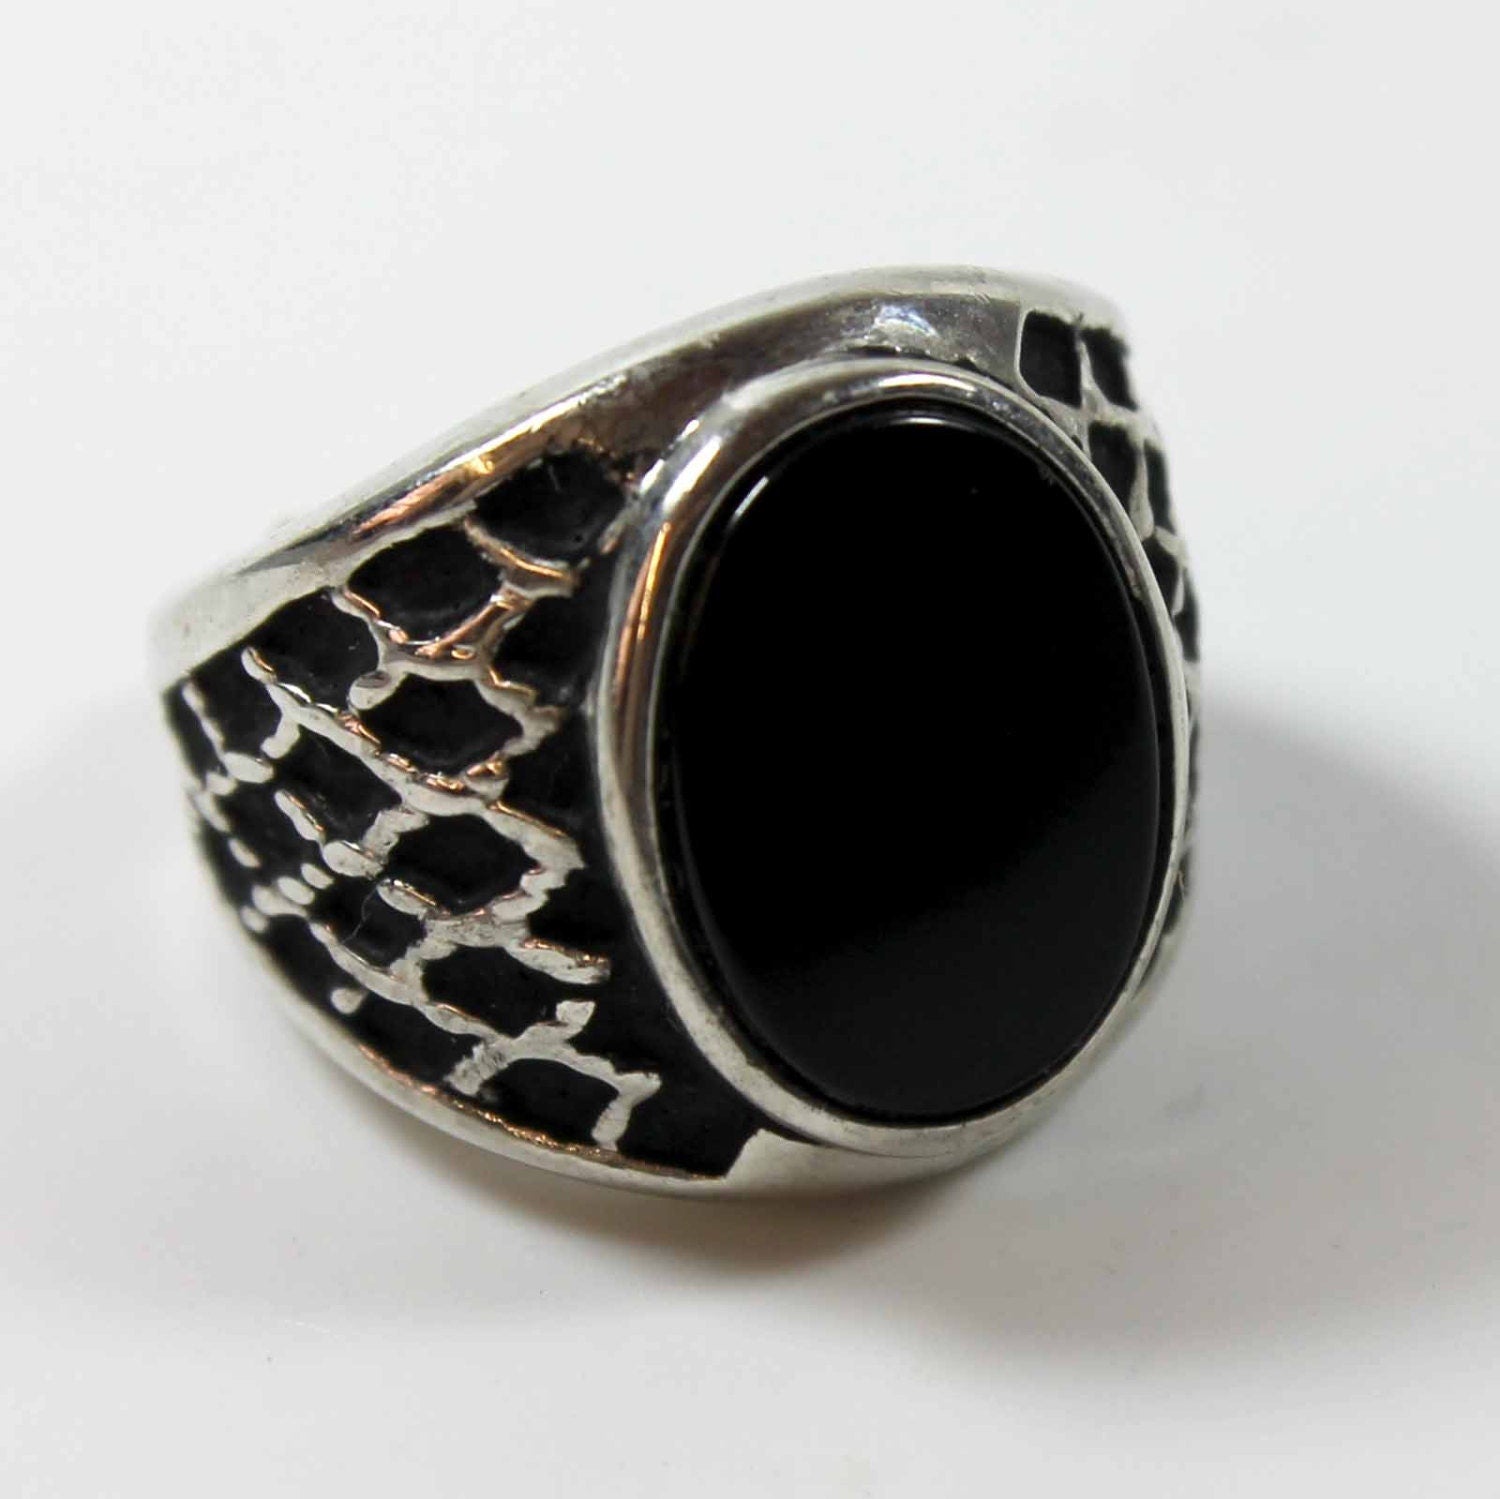 Vintage 1980s Mens Genuine Onyx Antiqued Rhodium Plated Silver Tone Ring Unisex Made in USA New Old Stock #R1052